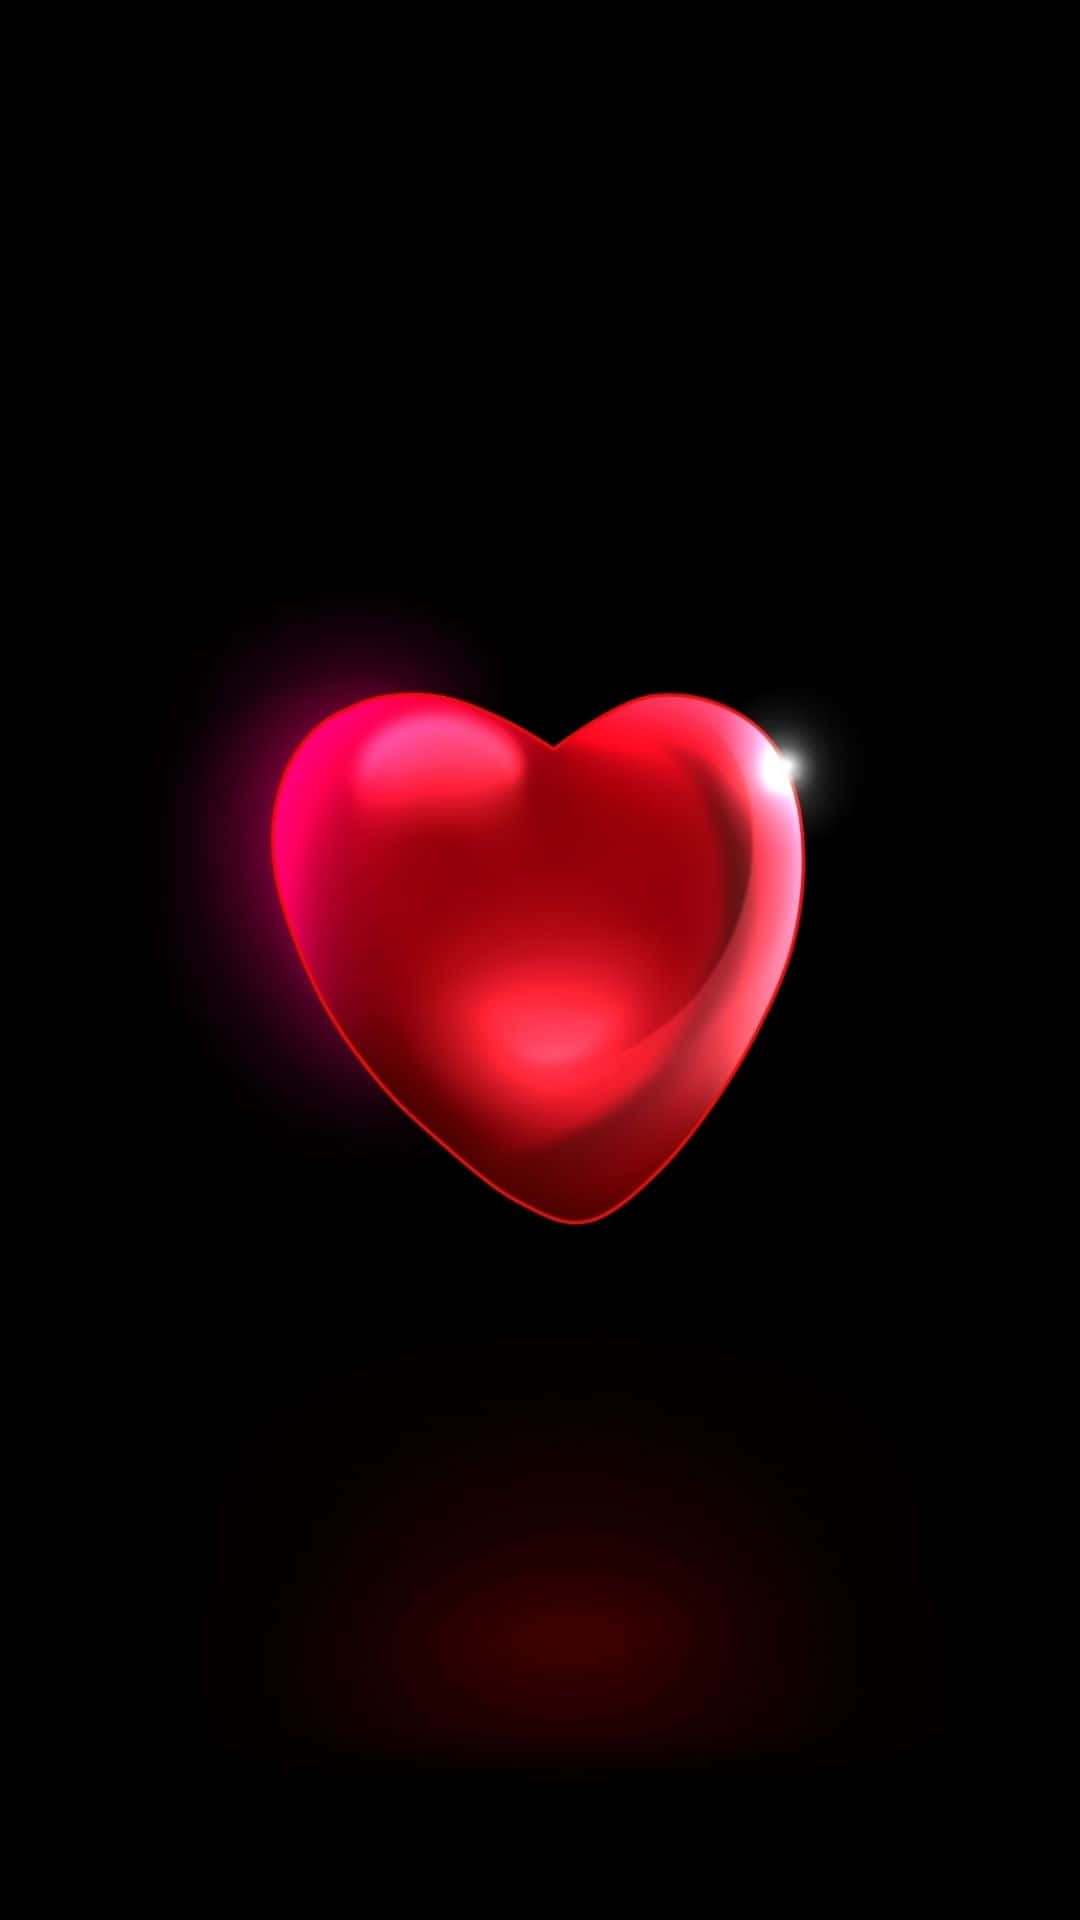 Show your love with a beautiful Red Heart! Wallpaper